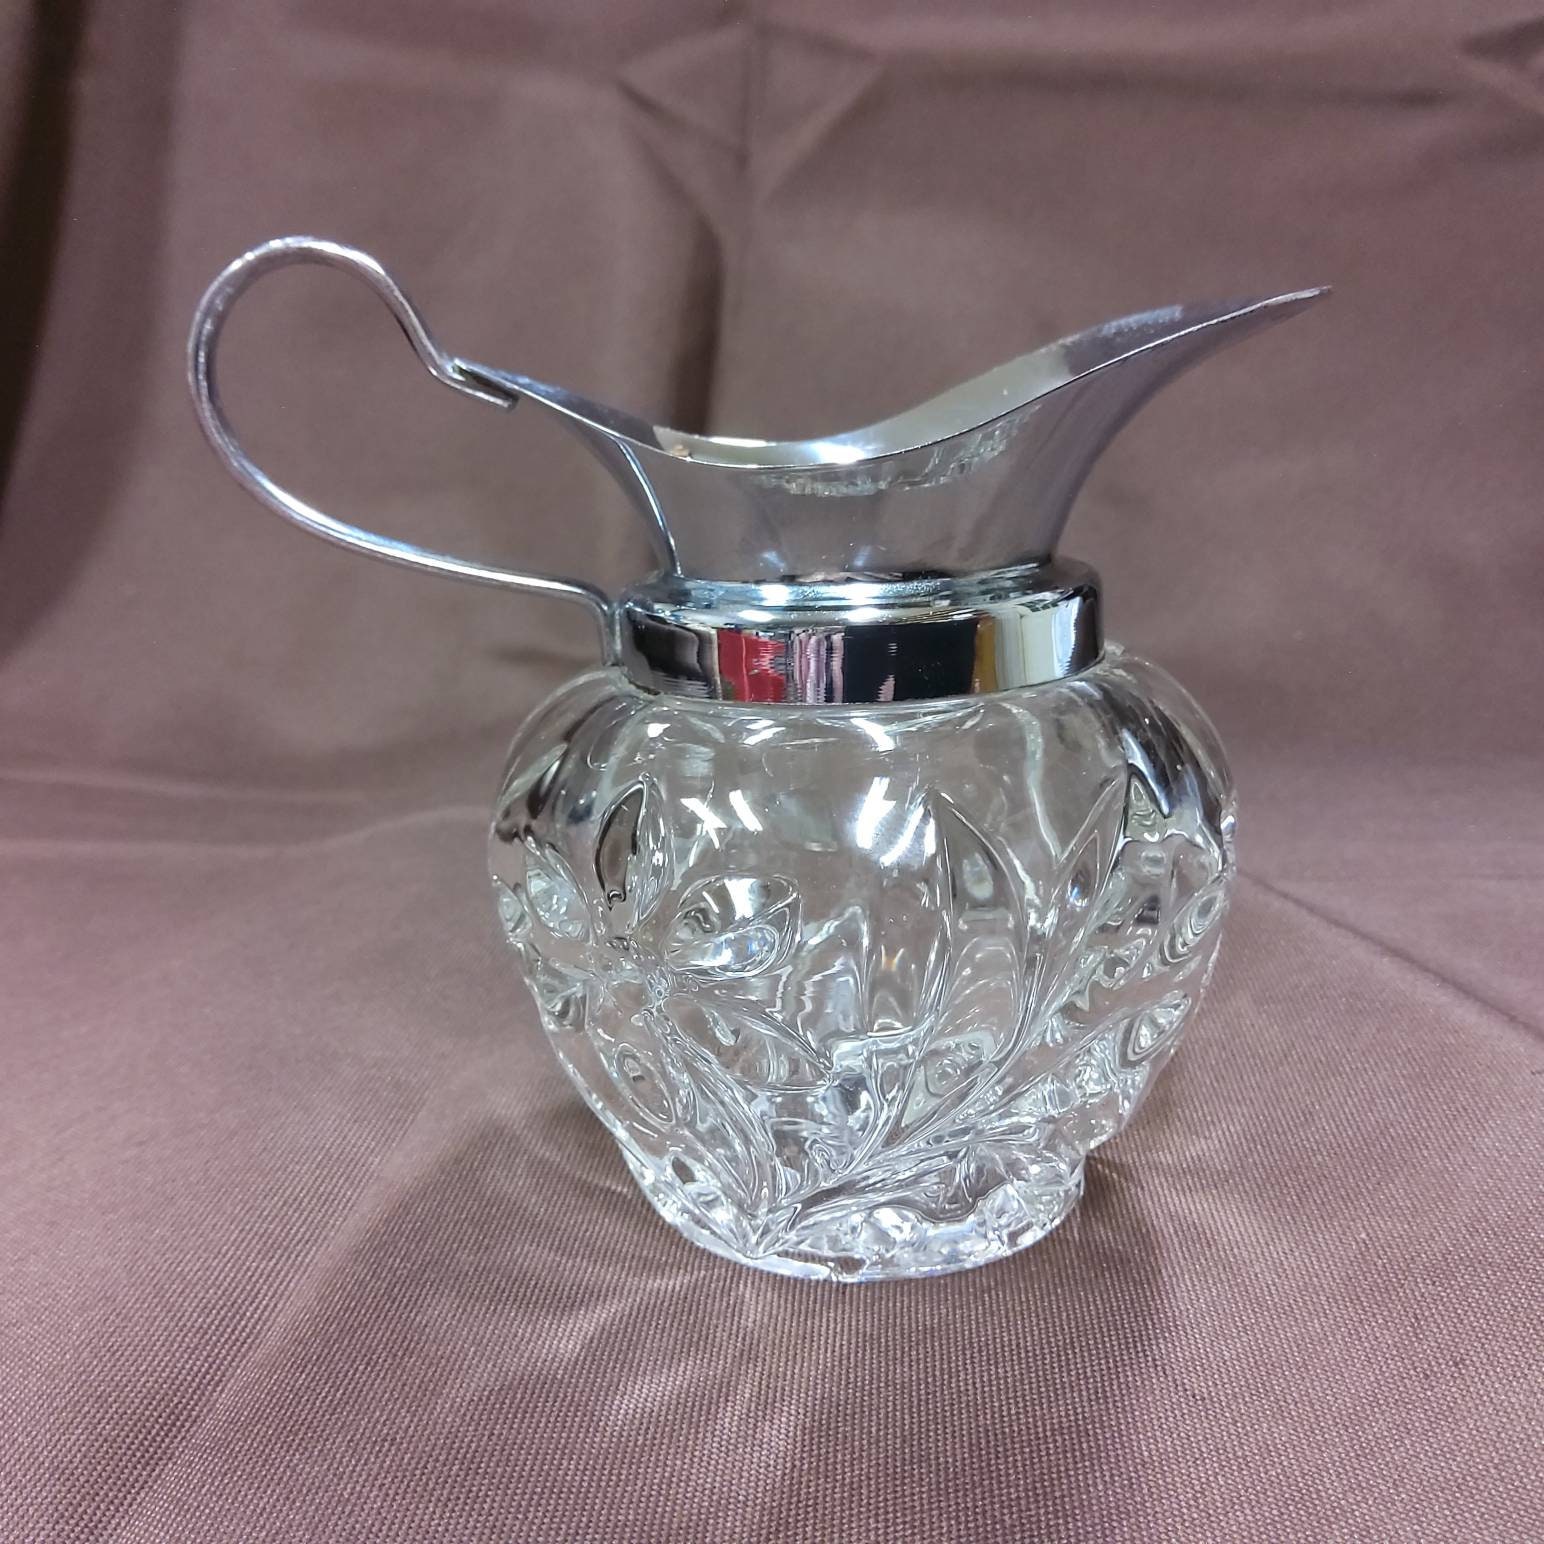 Small Cut Glass Pitcher With Silvertone Spout and Handle. No